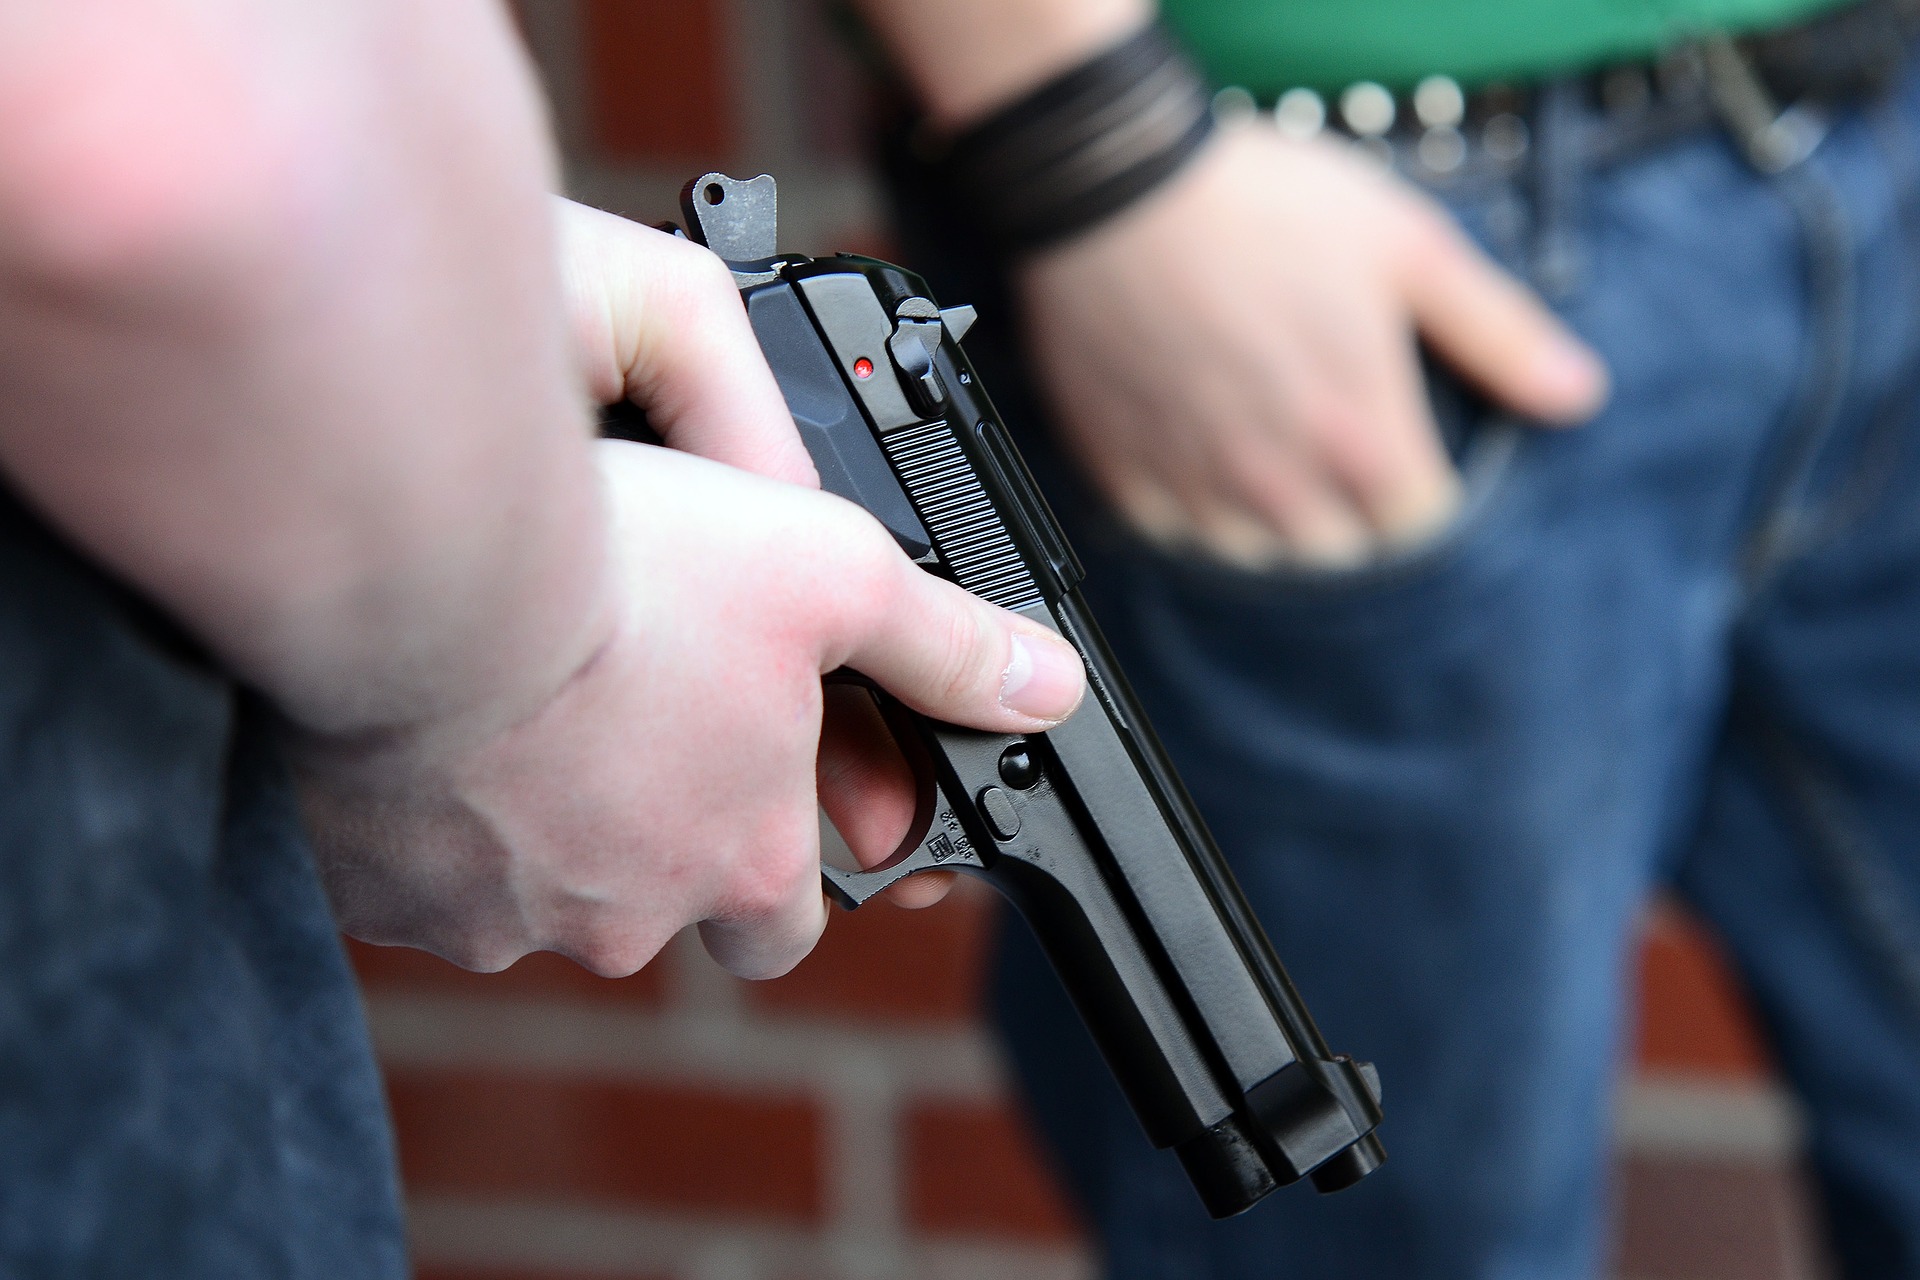 Top 5 Mistakes to Avoid if You Are a Gun Owner